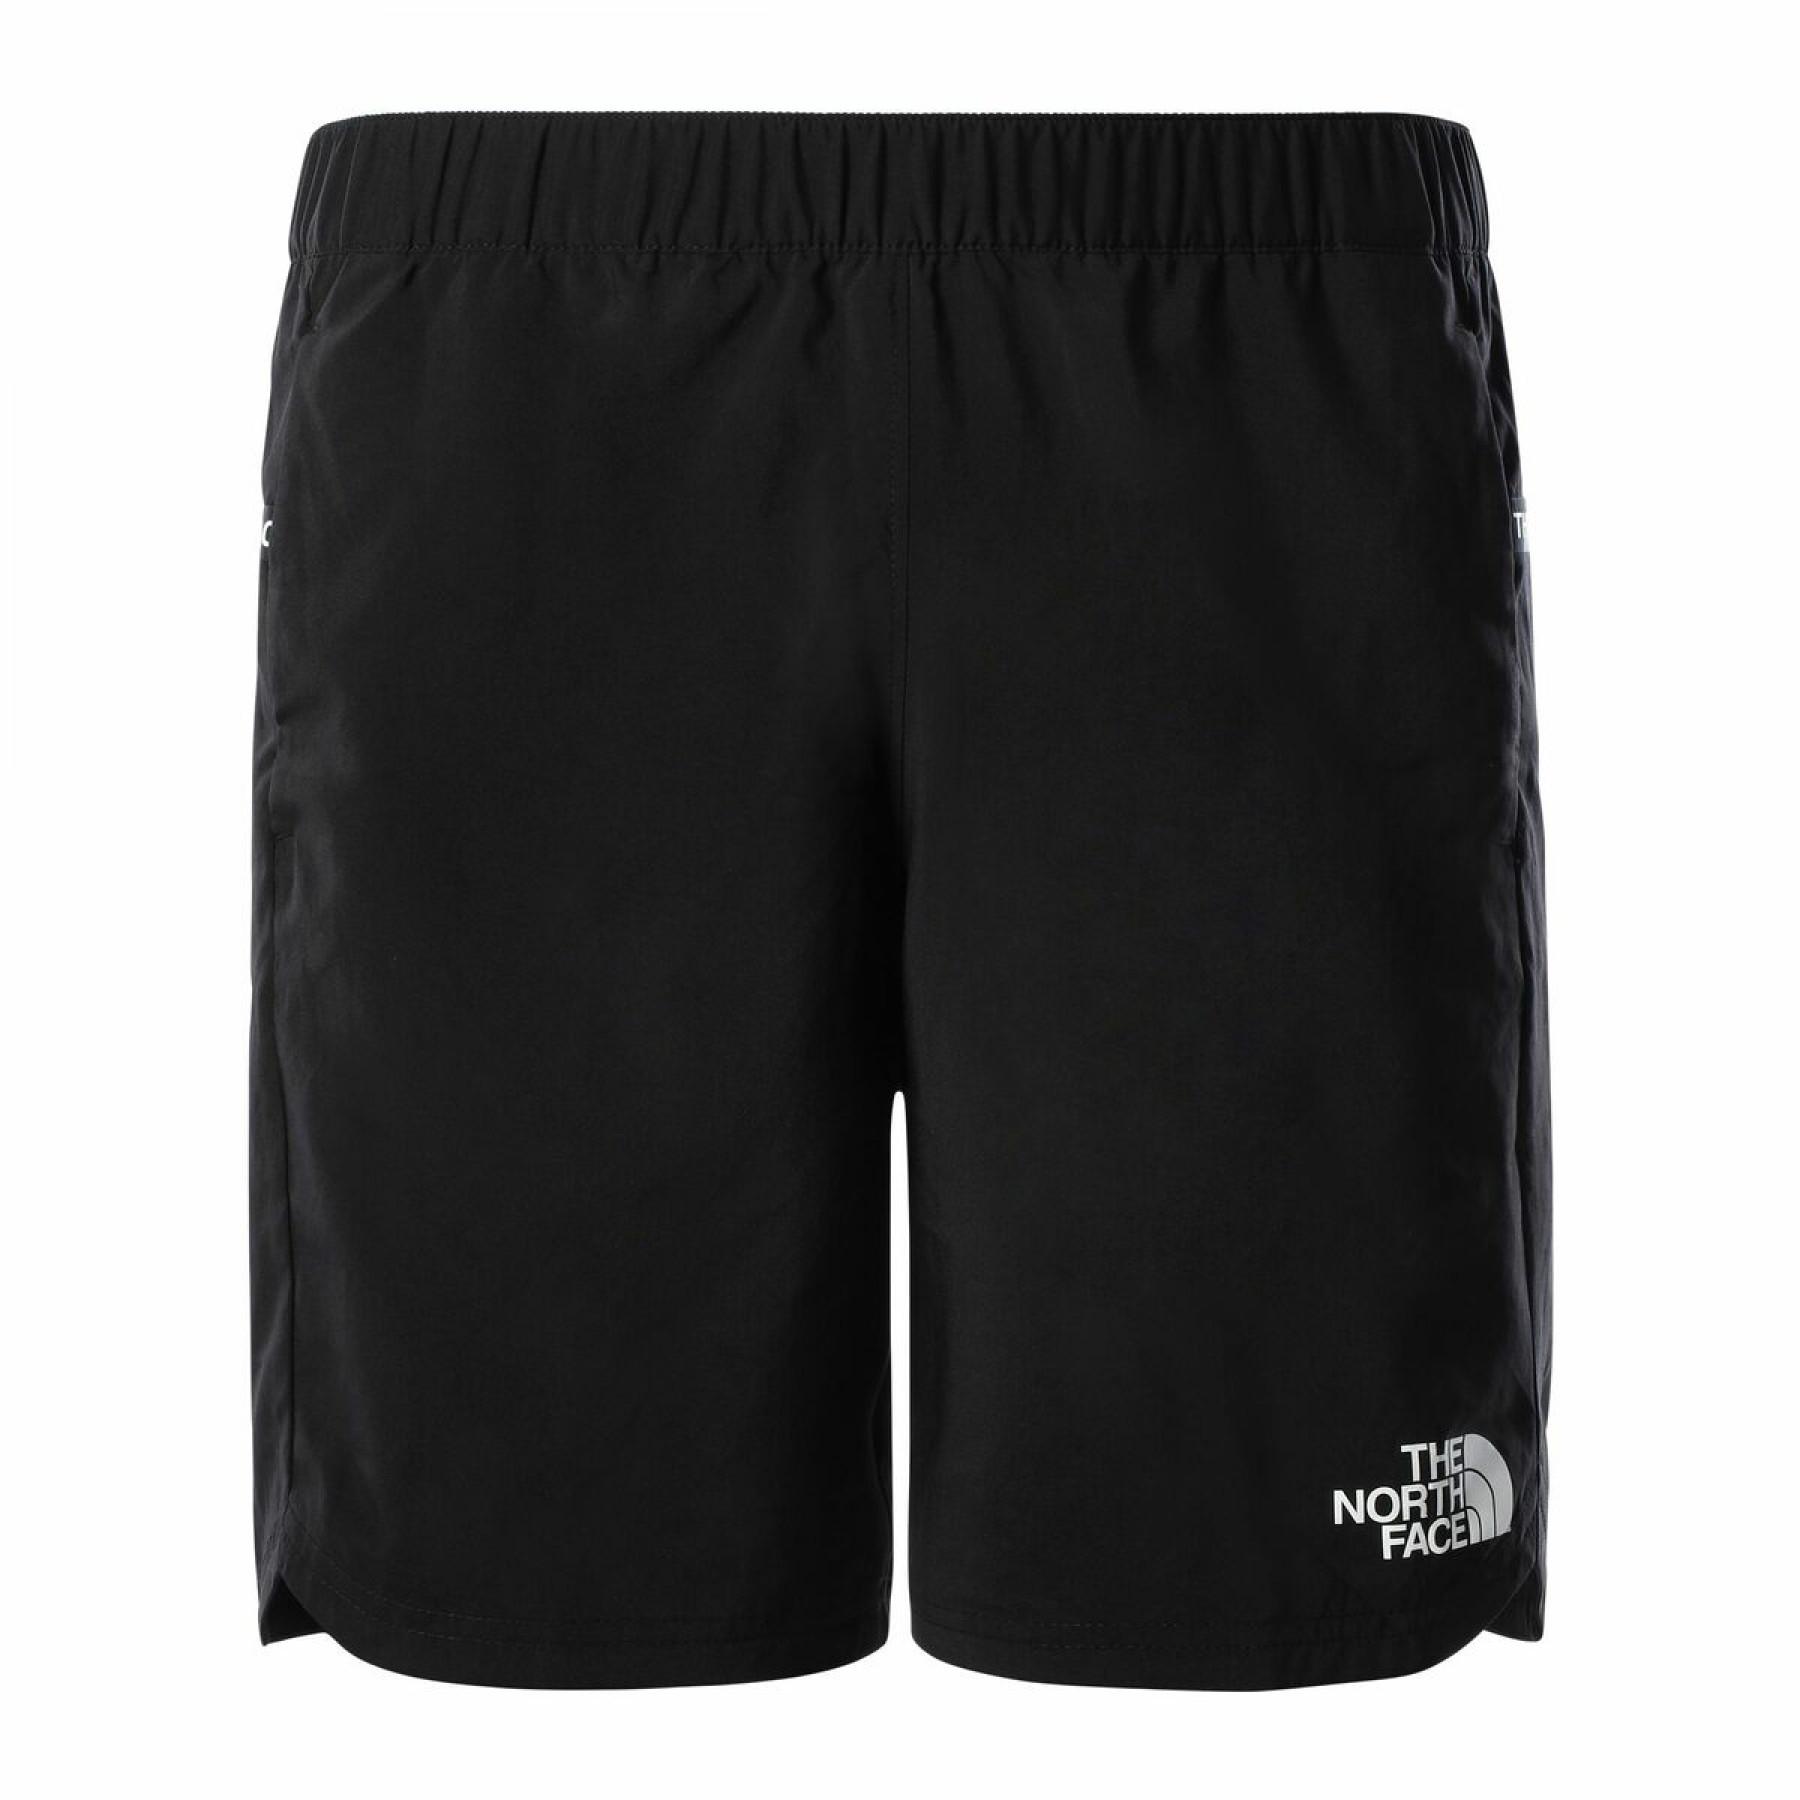 Curta The North Face Woven